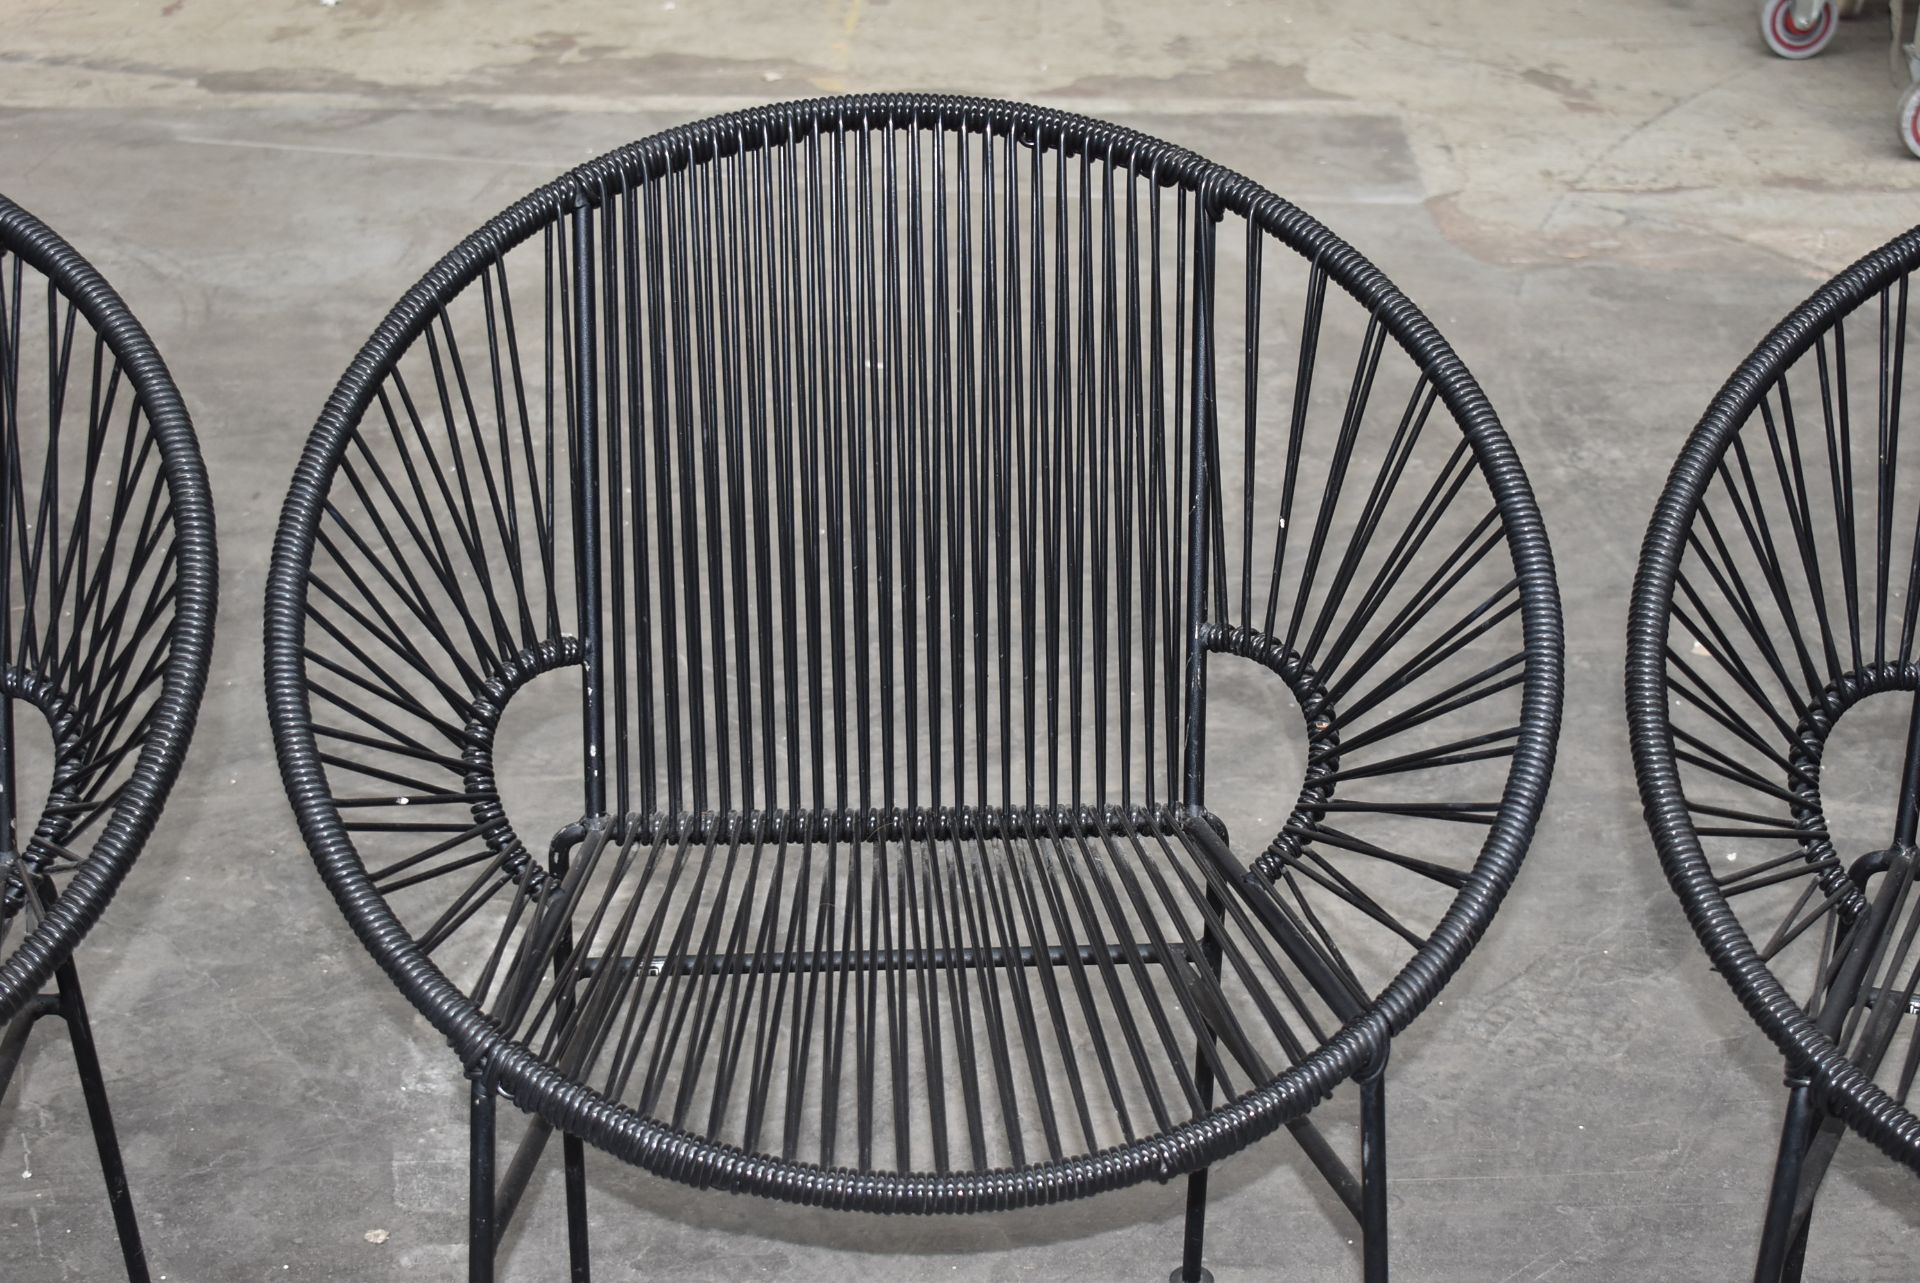 4 x Innit Designer Chairs - Acapulco Style Chairs in Black Suitable For Indoor or Outdoor Use - - Image 5 of 11